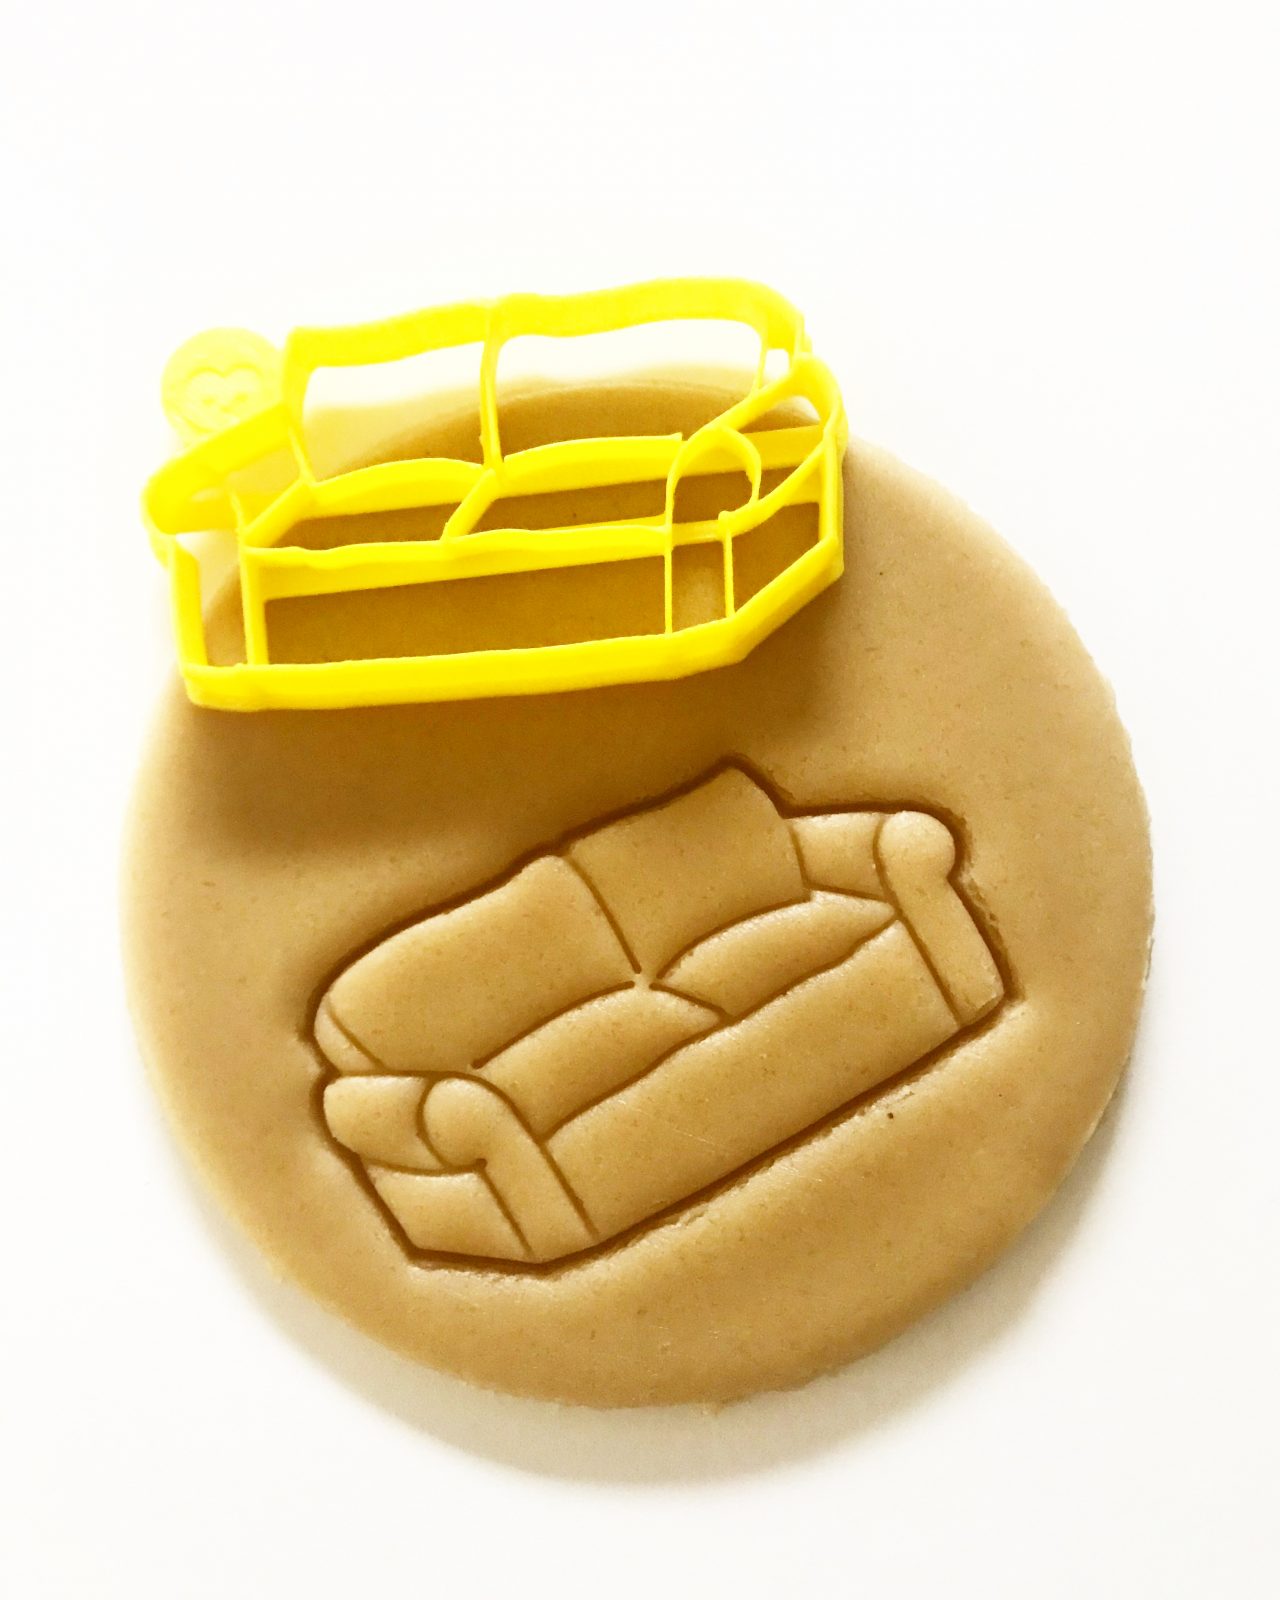 Couch Cookie Cutter